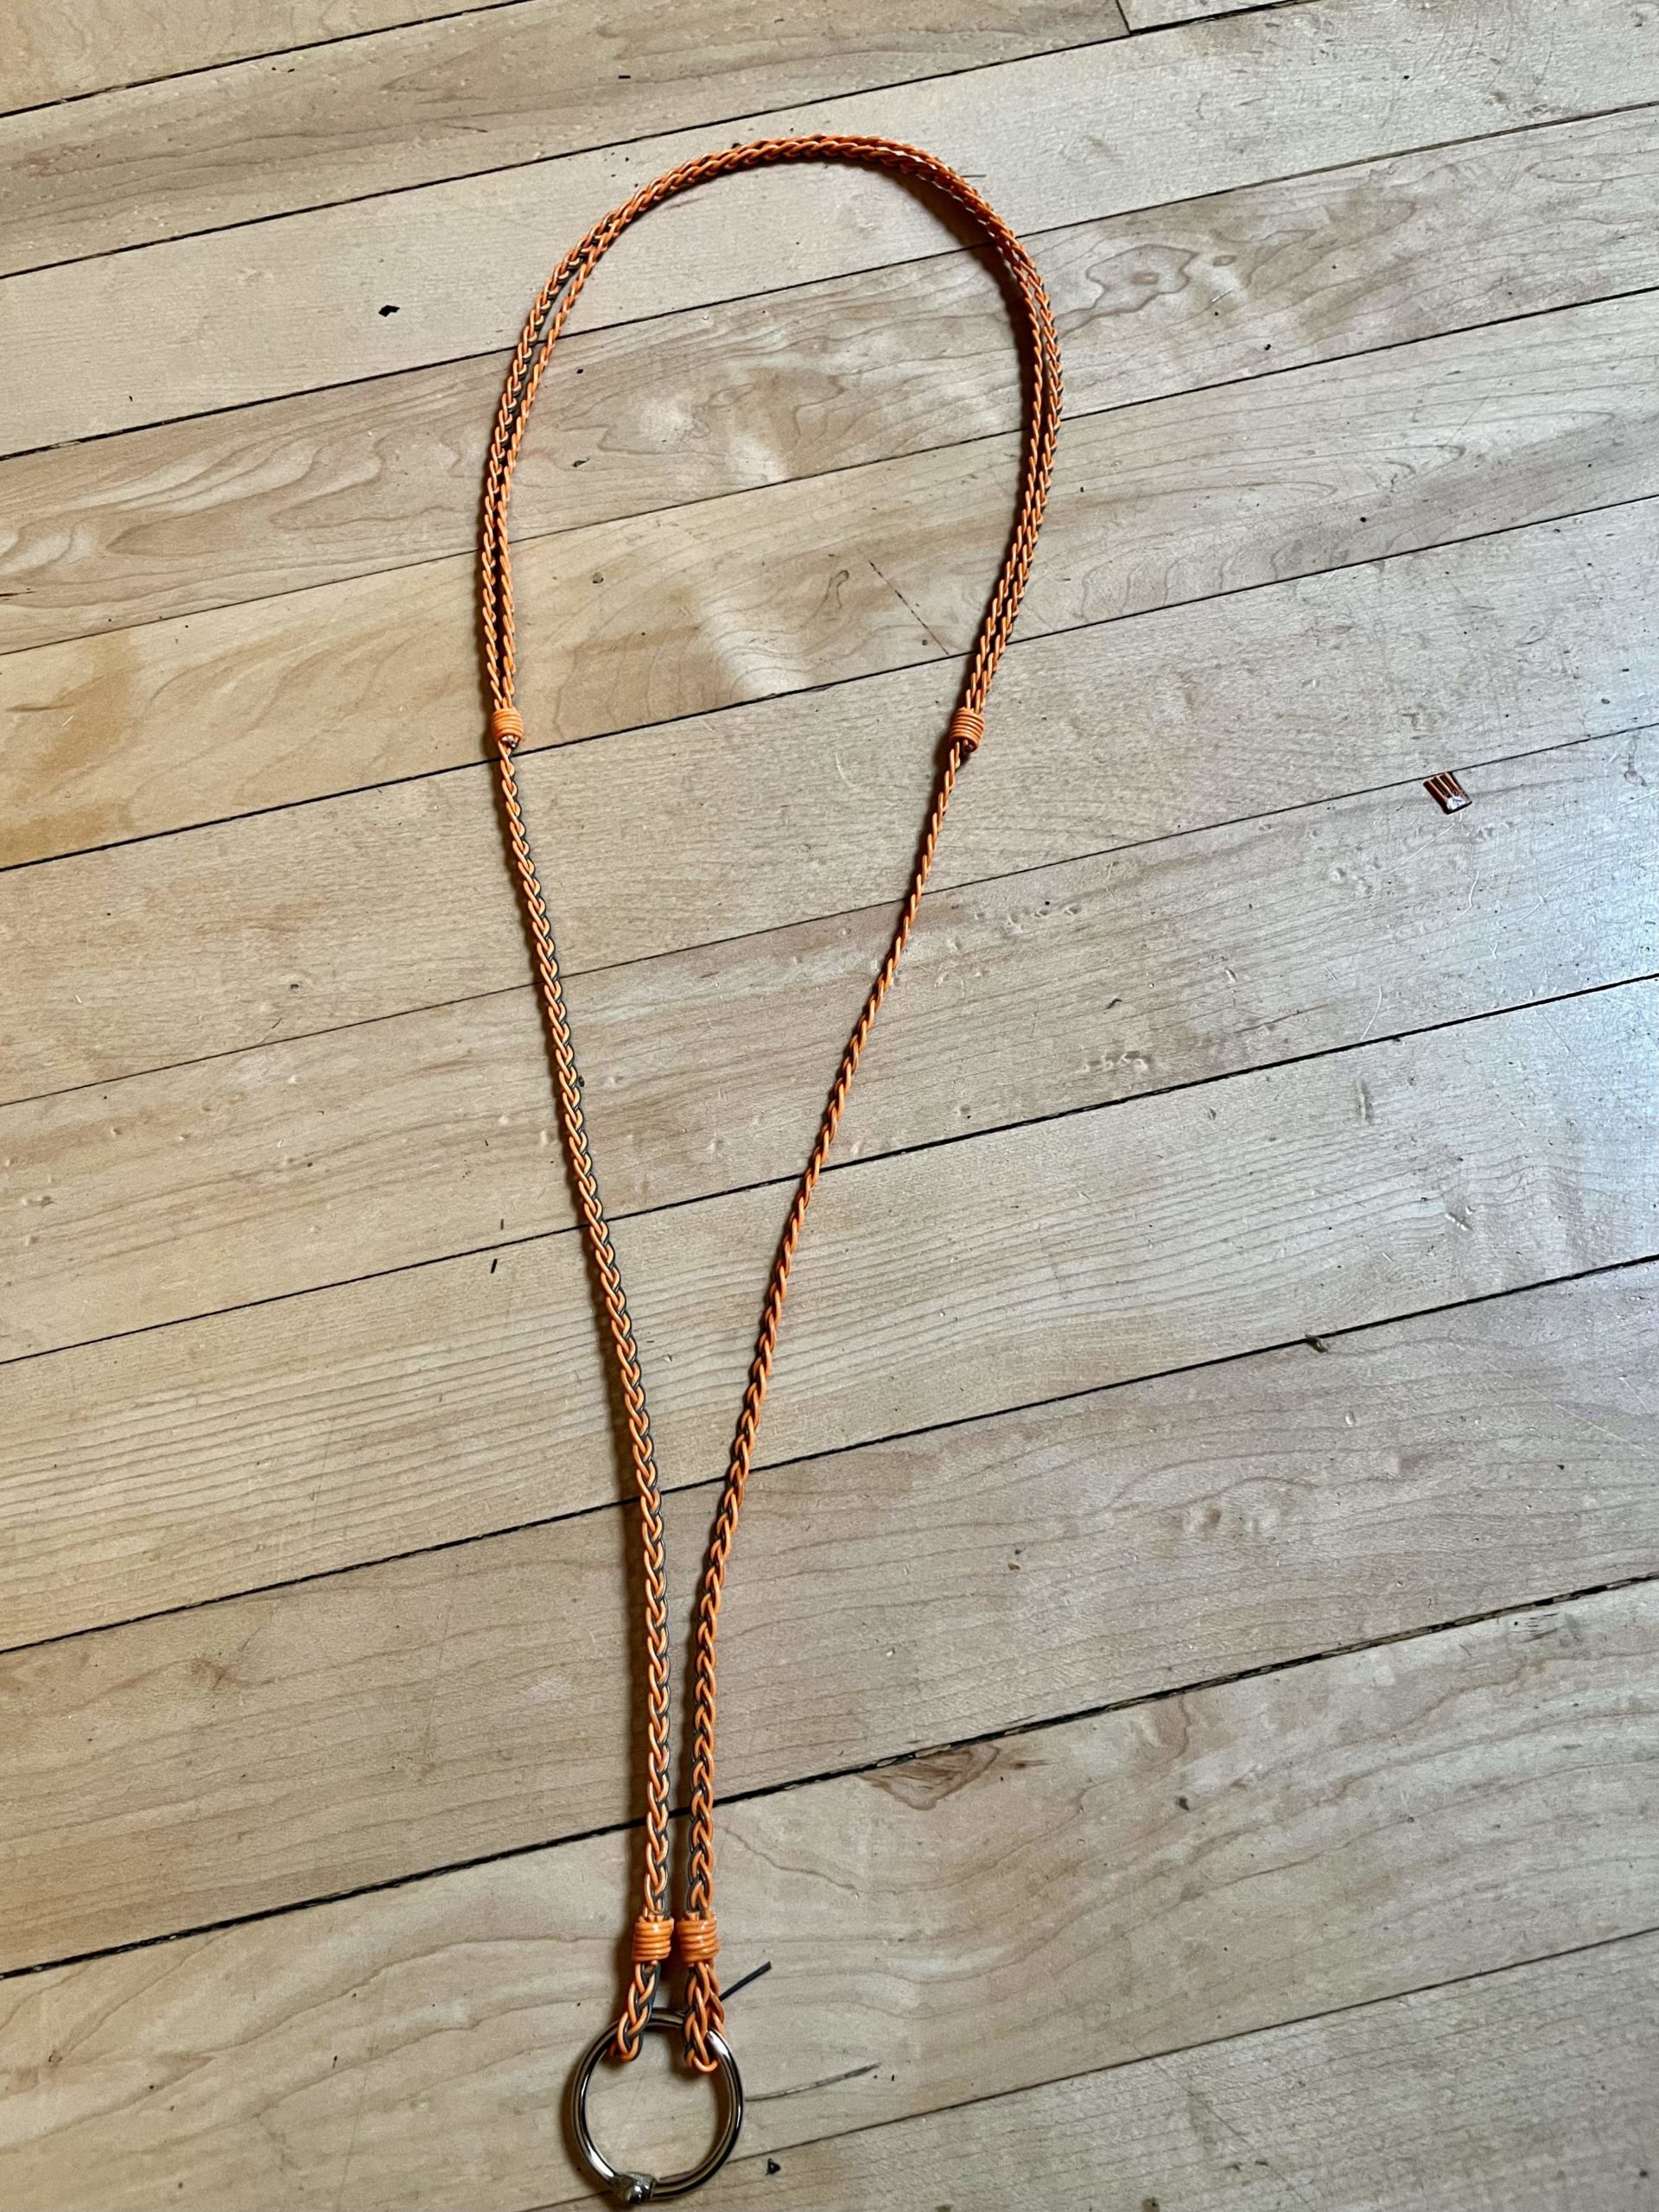 Adjustable Fly Line Braided Lanyard - Flyvines